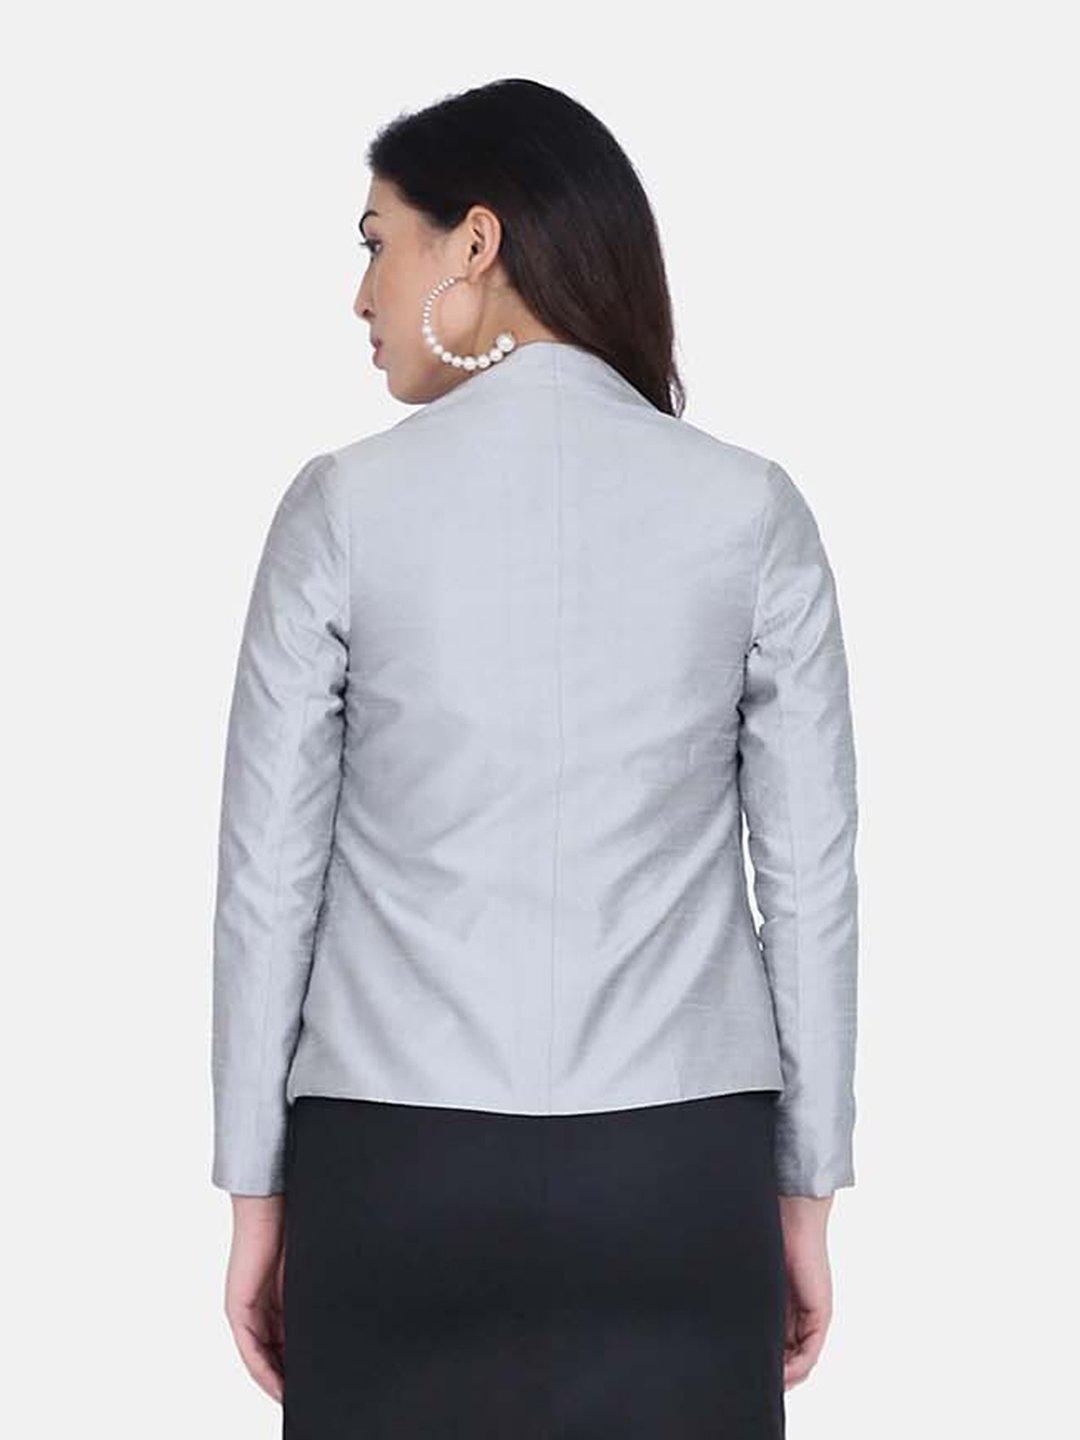 Dupioni Open Front Jacket For Women -Silver Grey